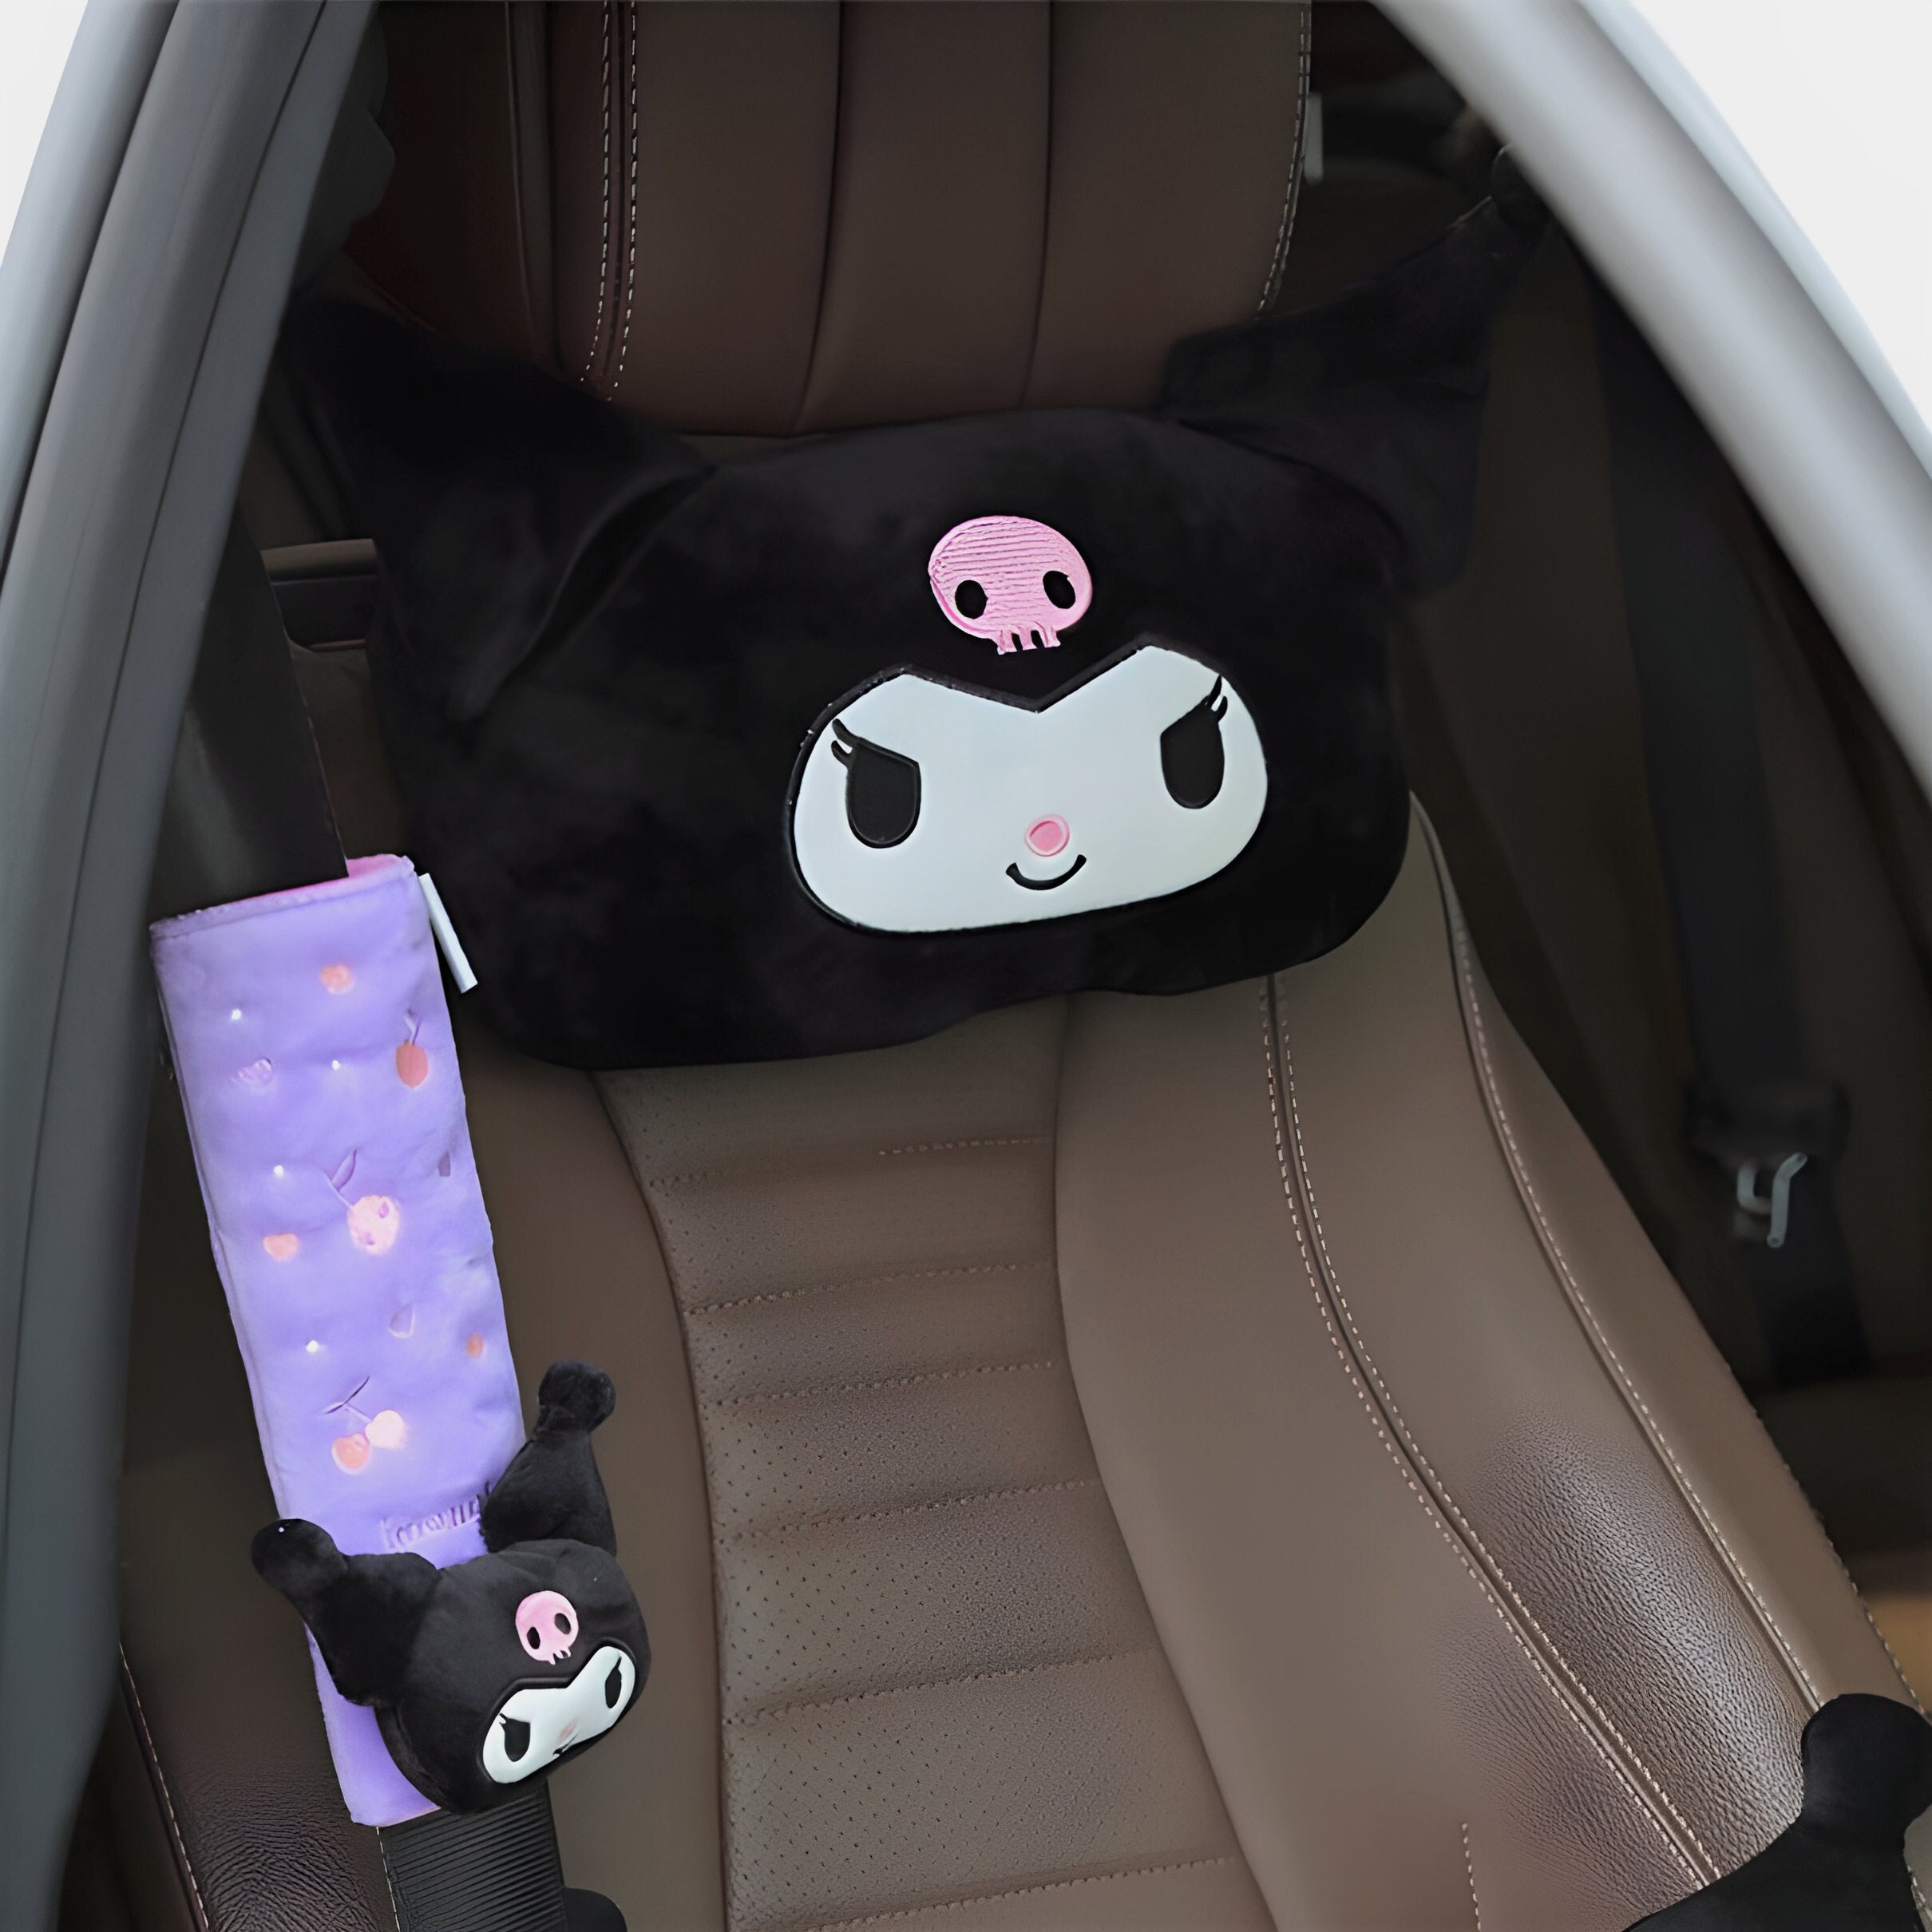 Anime Car Seat Covers  Add Style and Protection to Your Ride  EzCustomcar